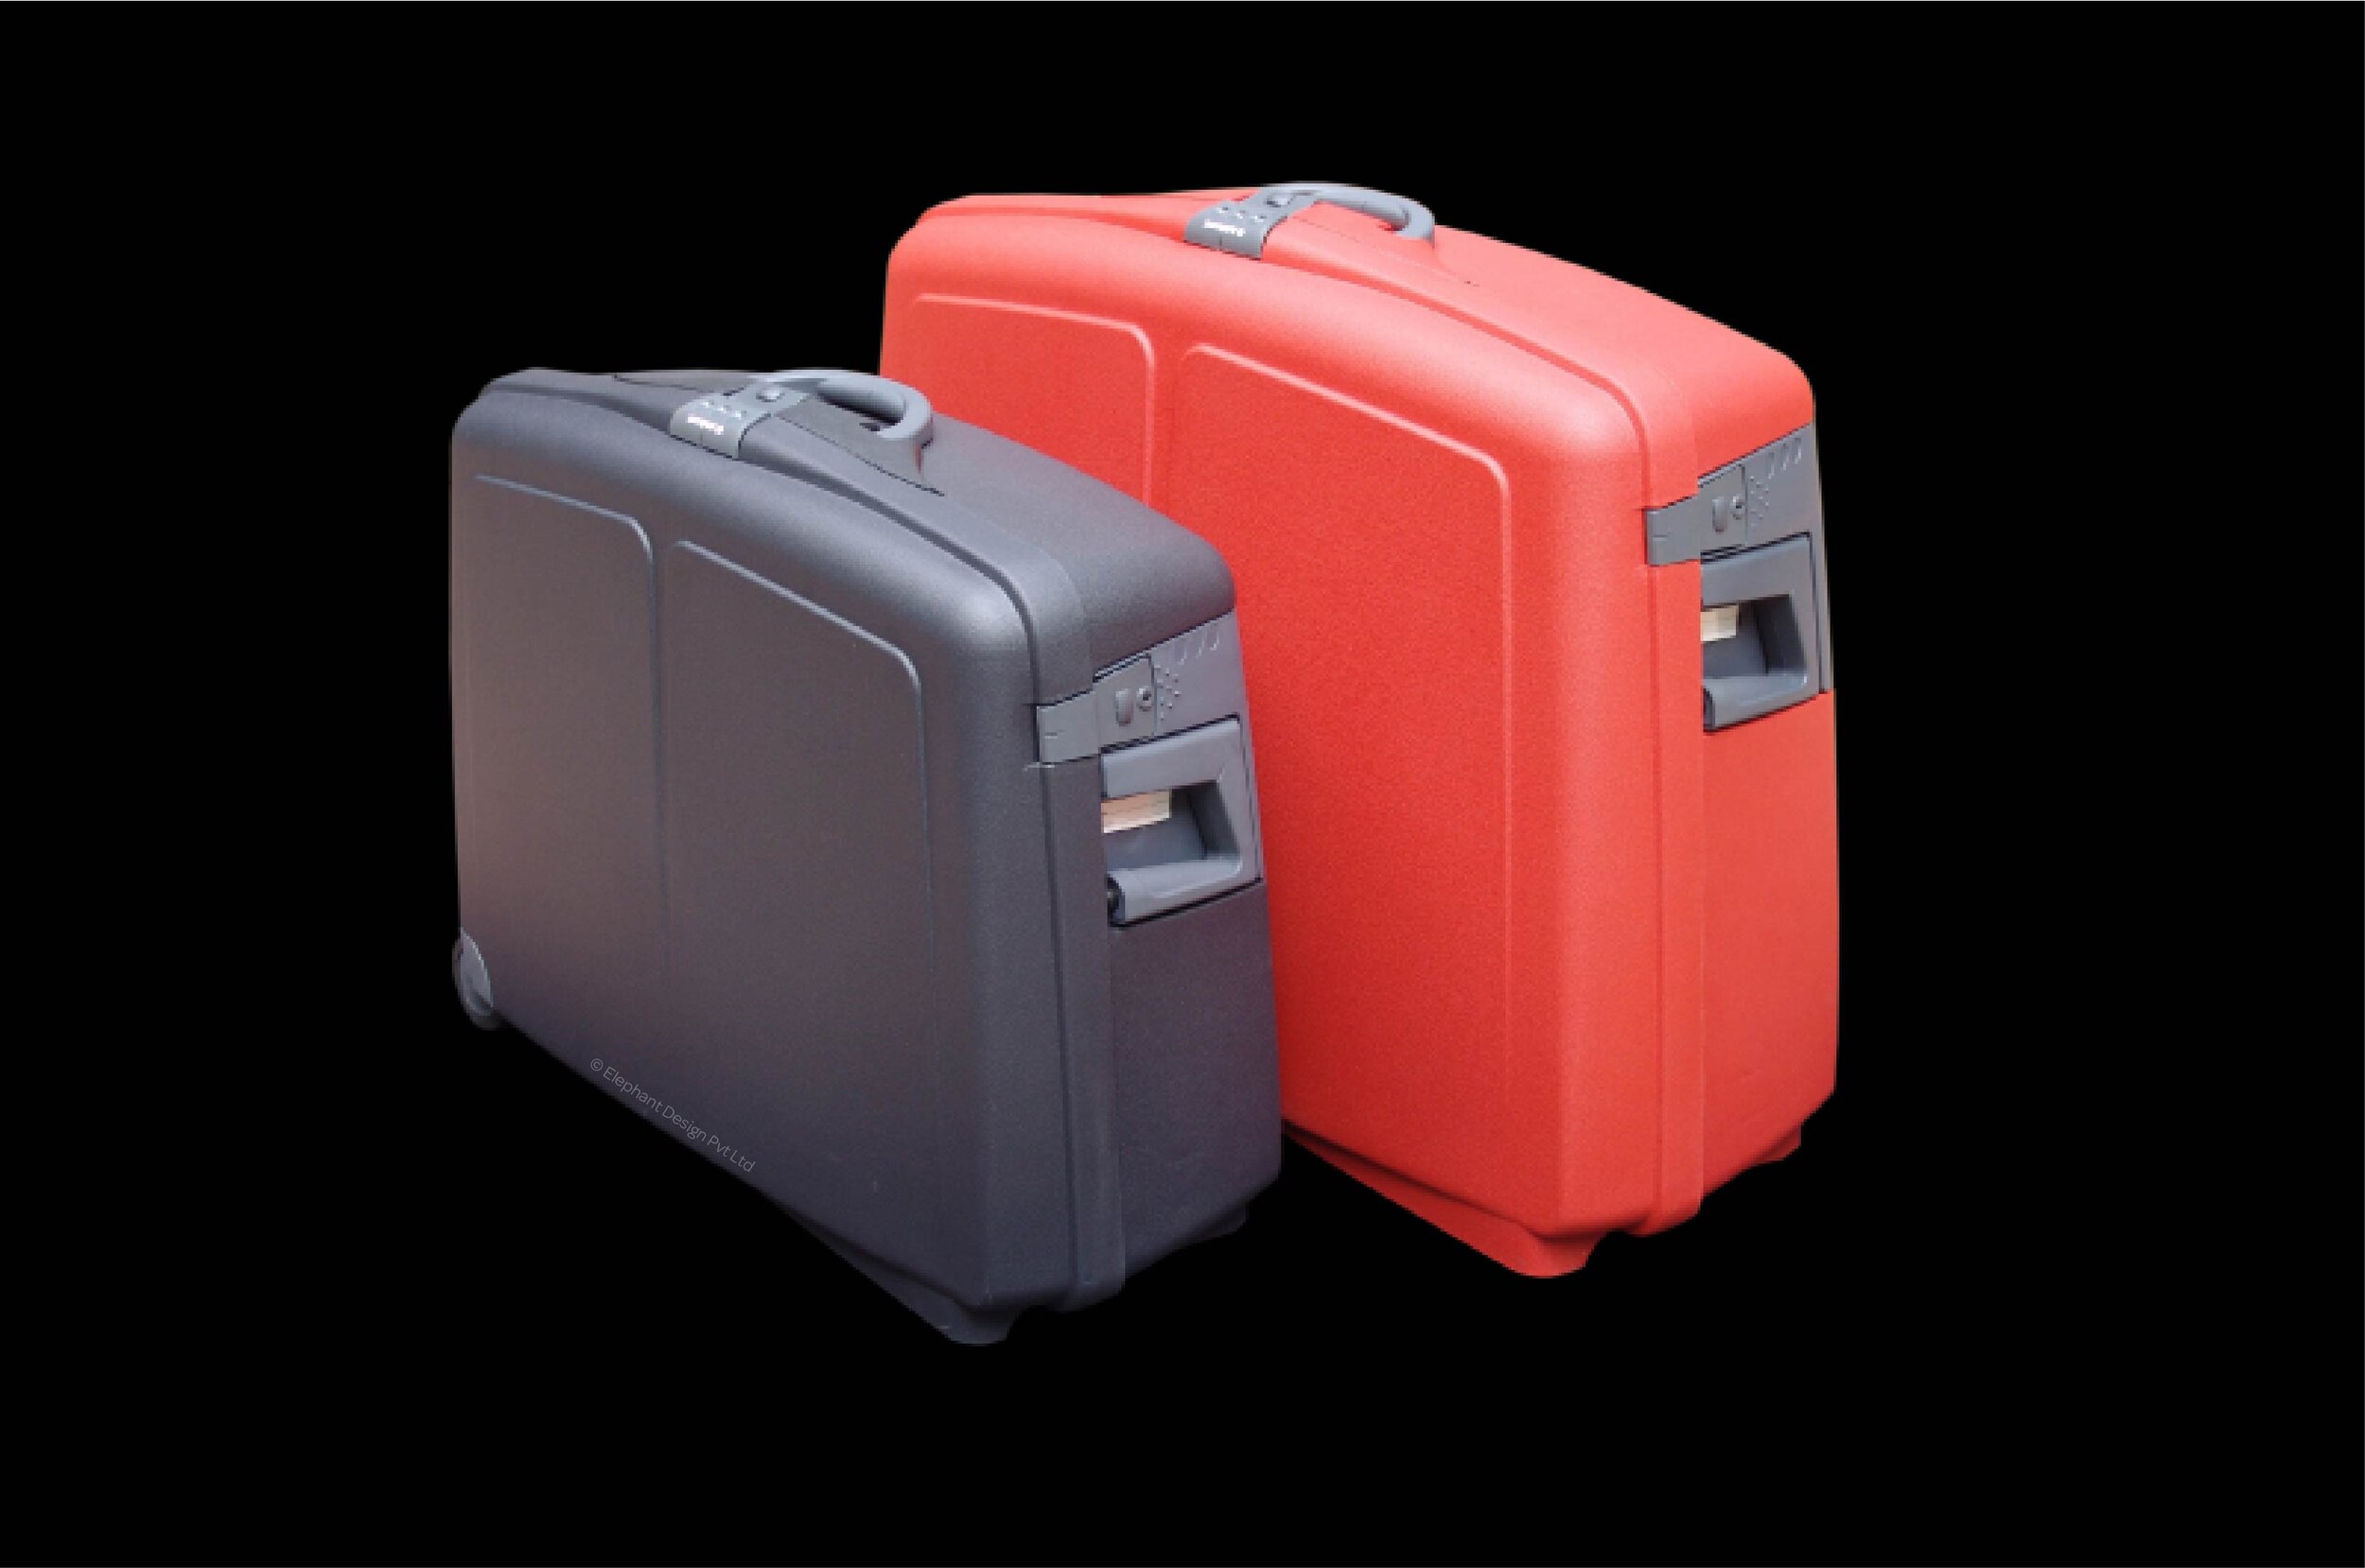 Brand New VIP luggage Bag New Delhi - Buy Sell Used Products Online India |  SecondHandBazaar.in